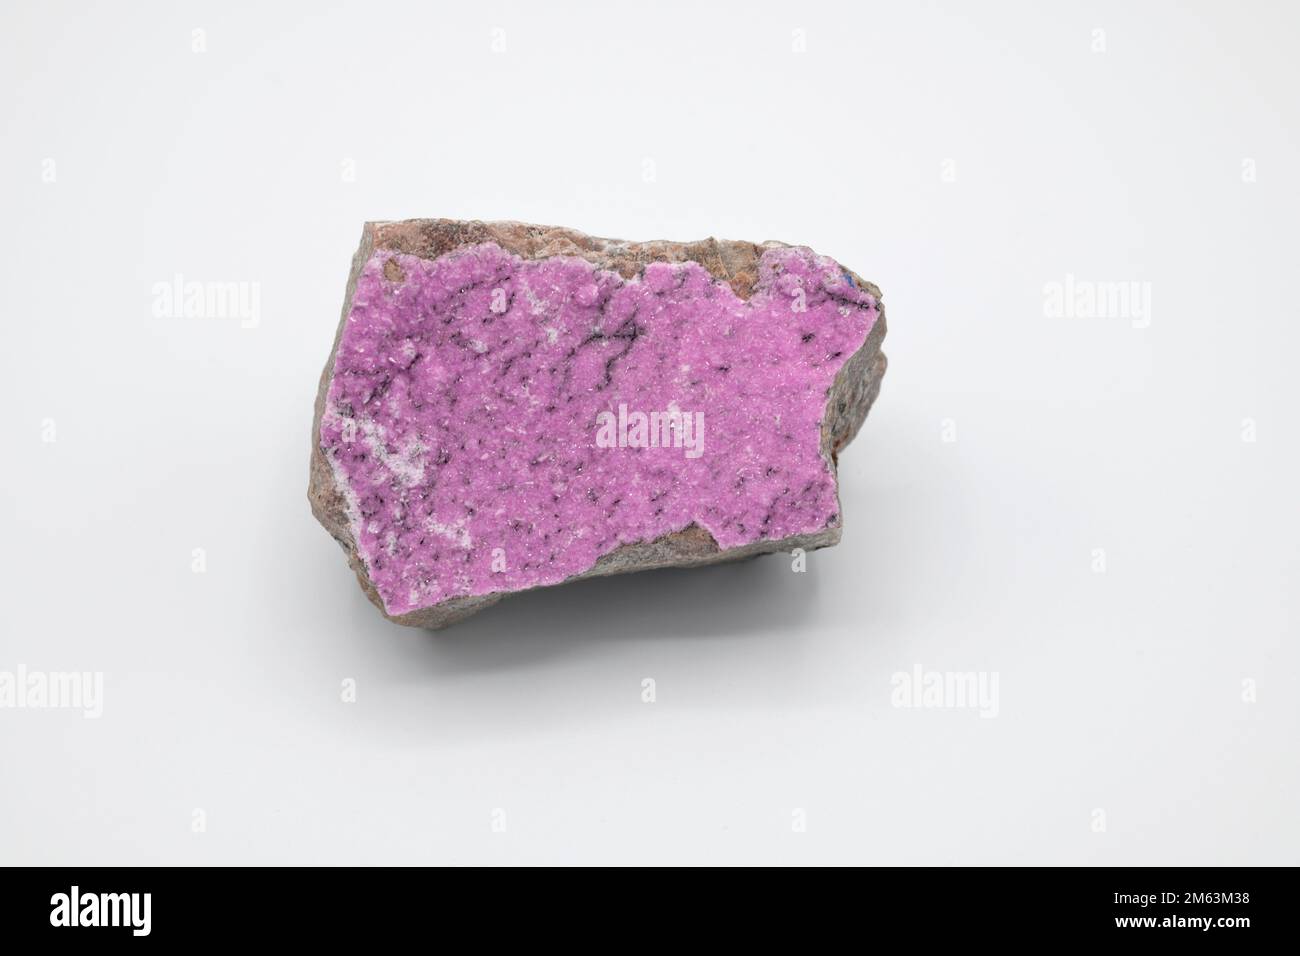 Cobaltite is a variety of calcite rich on cobalt. This sample comes from China. Stock Photo